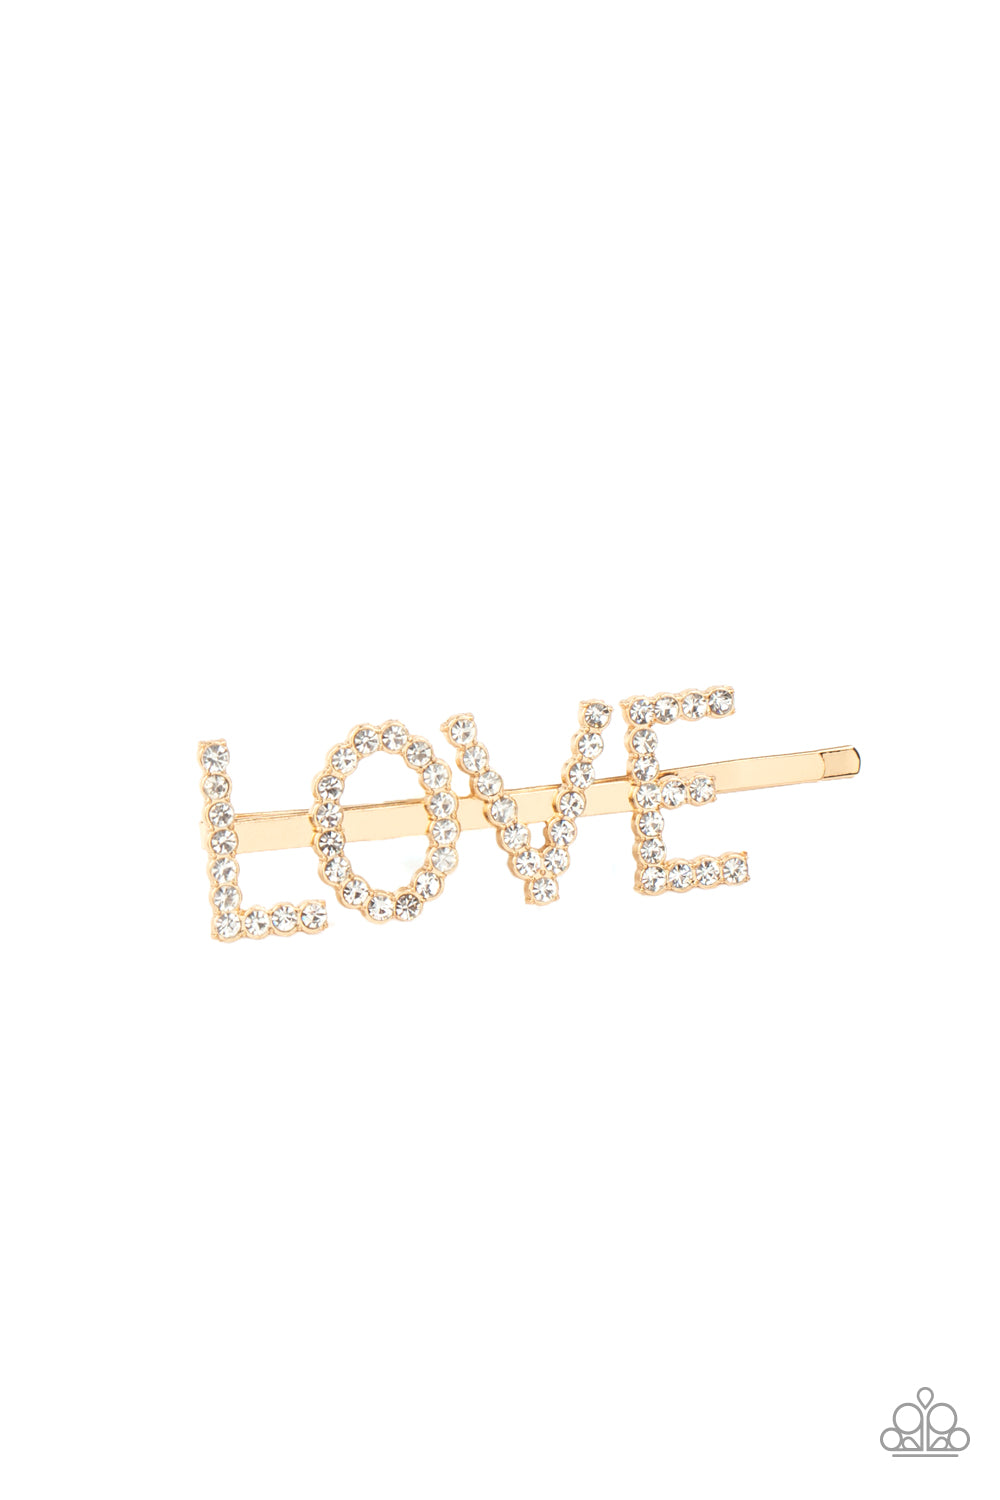 Paparazzi Accessories All You Need Is Love - Gold Hair Clips